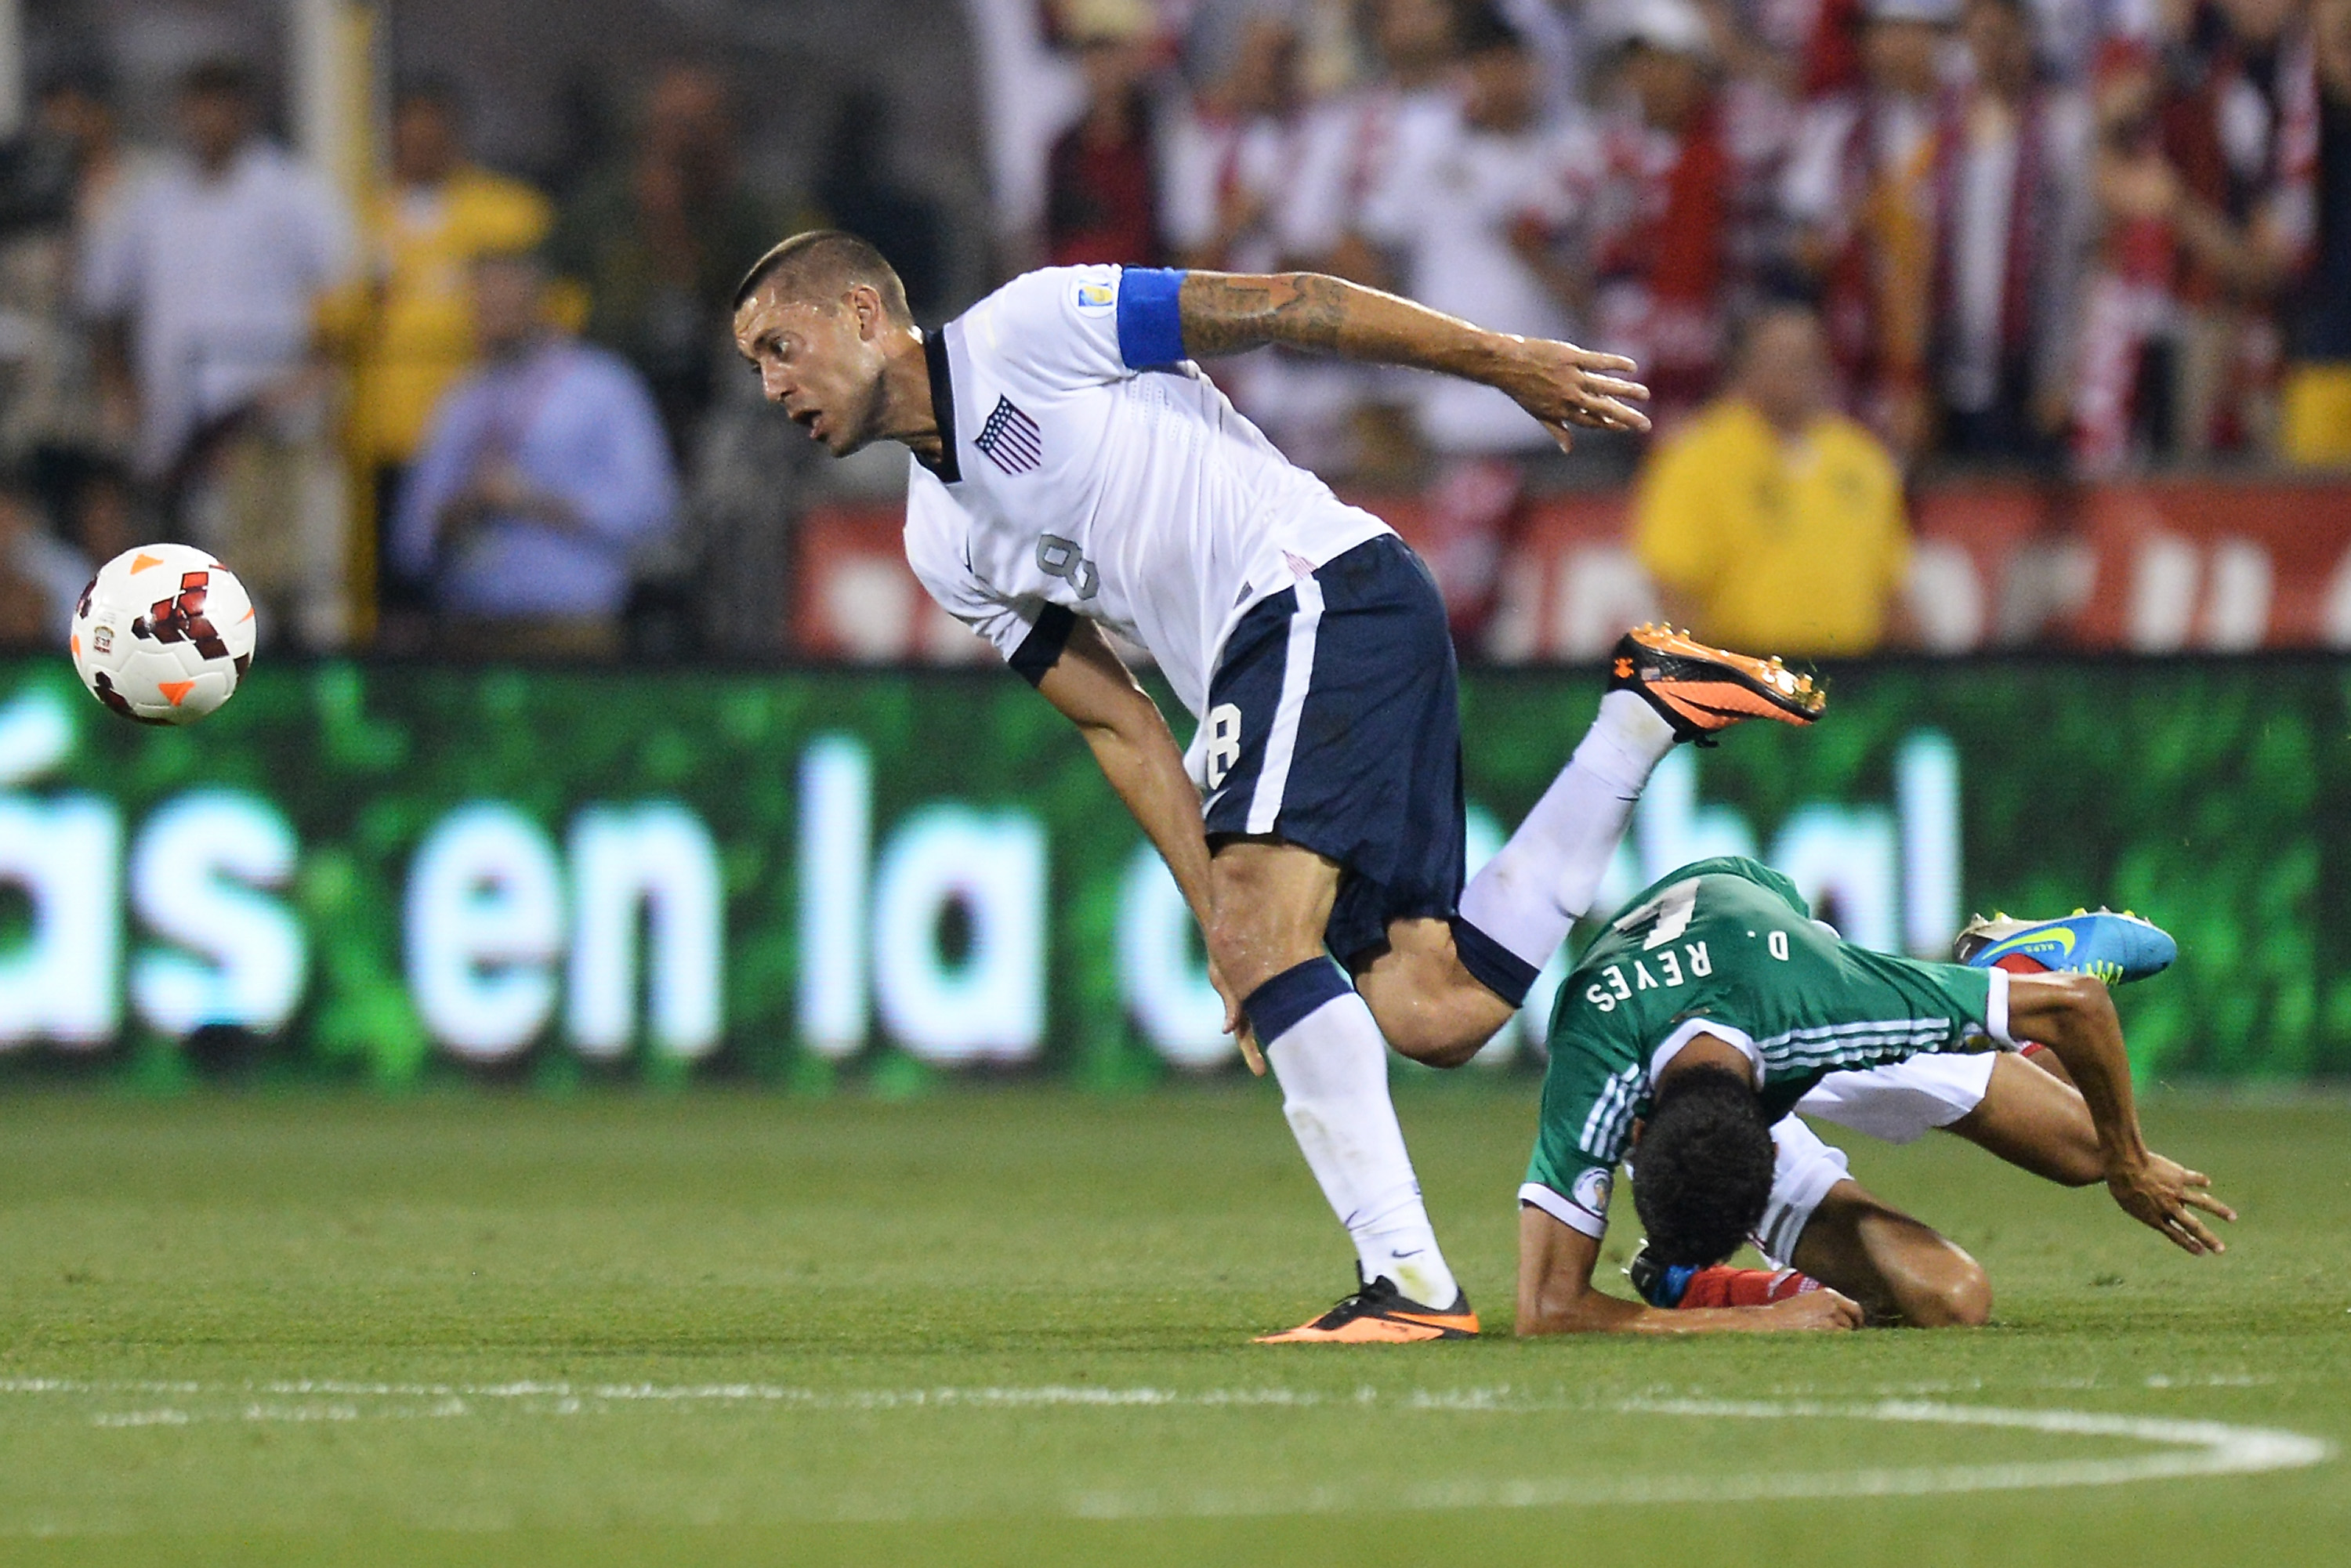 Part skill, part swagger, all American: Clint Dempsey leaves indelible mark  on U.S. Soccer